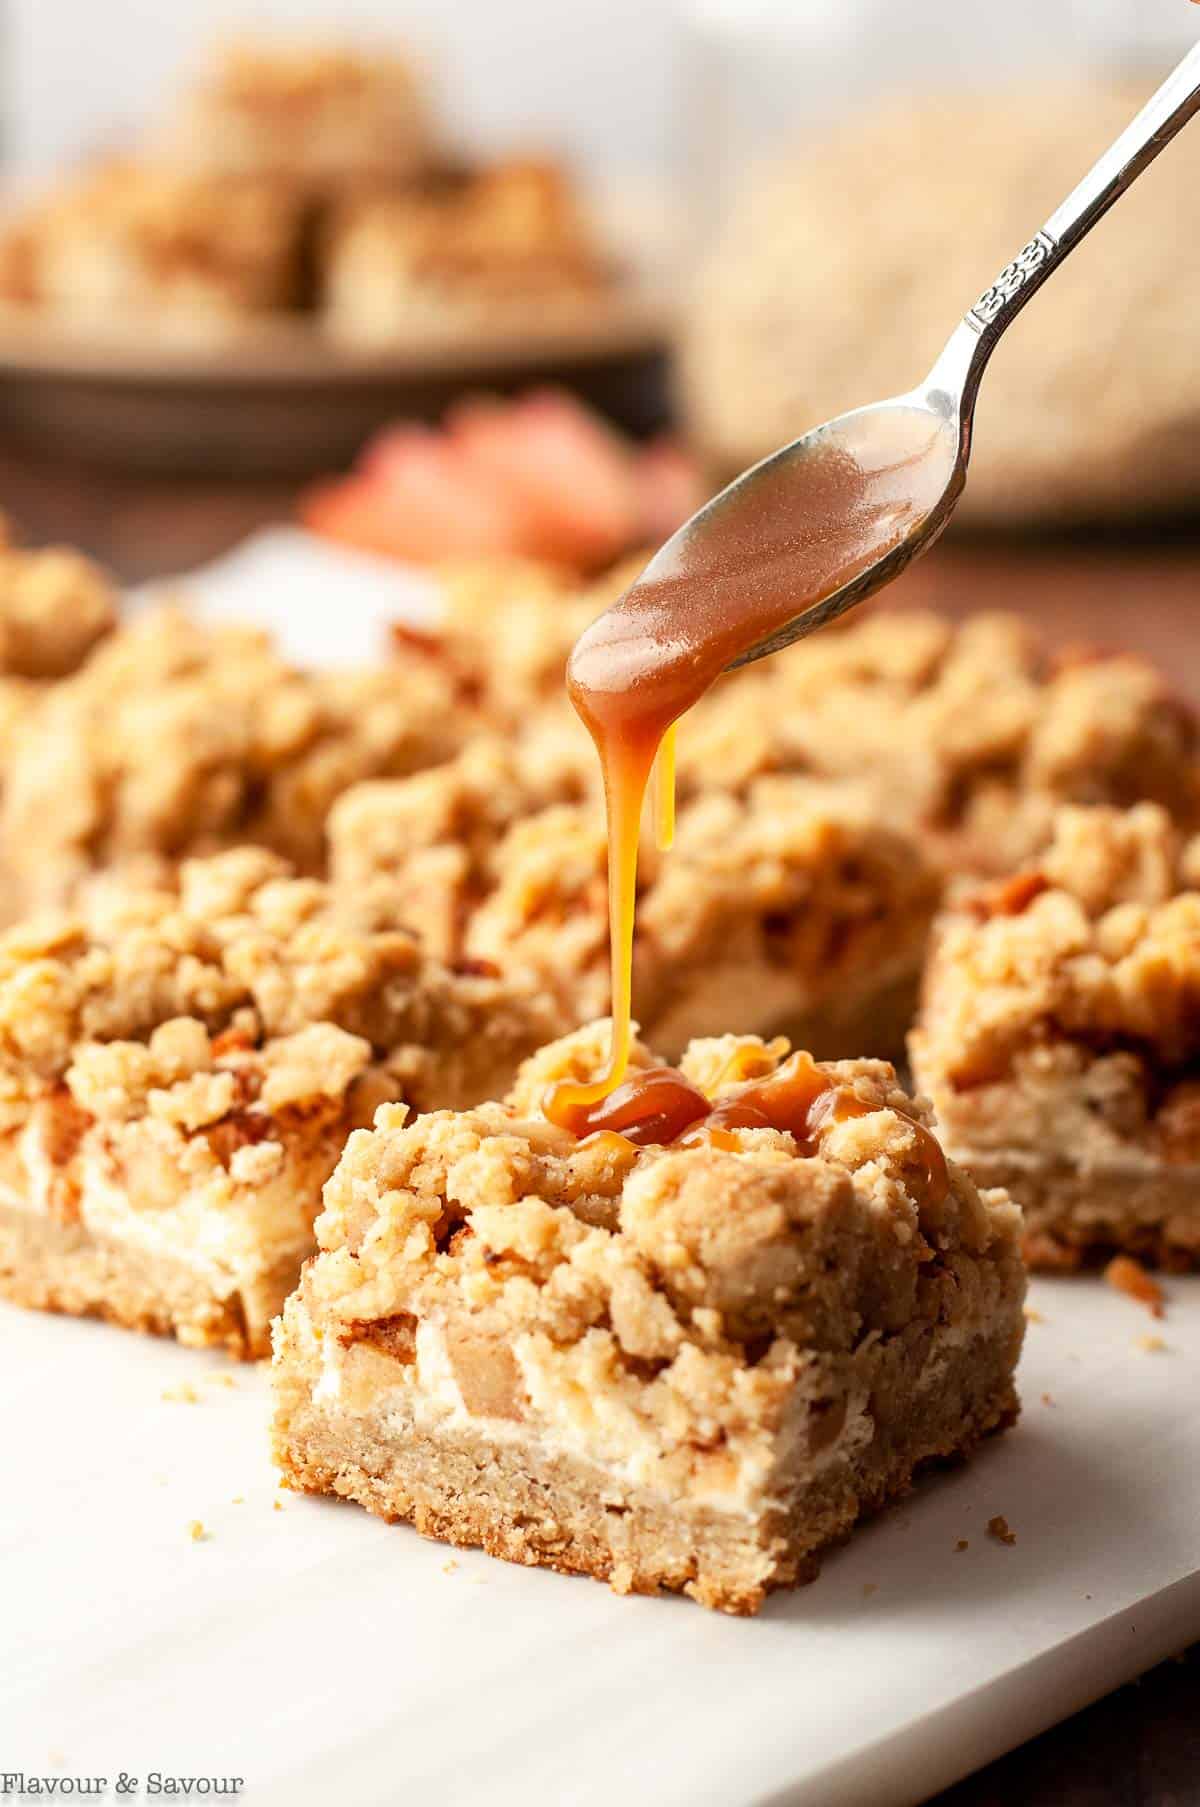 Drizzling caramel sauce from a spoon on Gluten-free Apple Cheesecake Crumble Bars